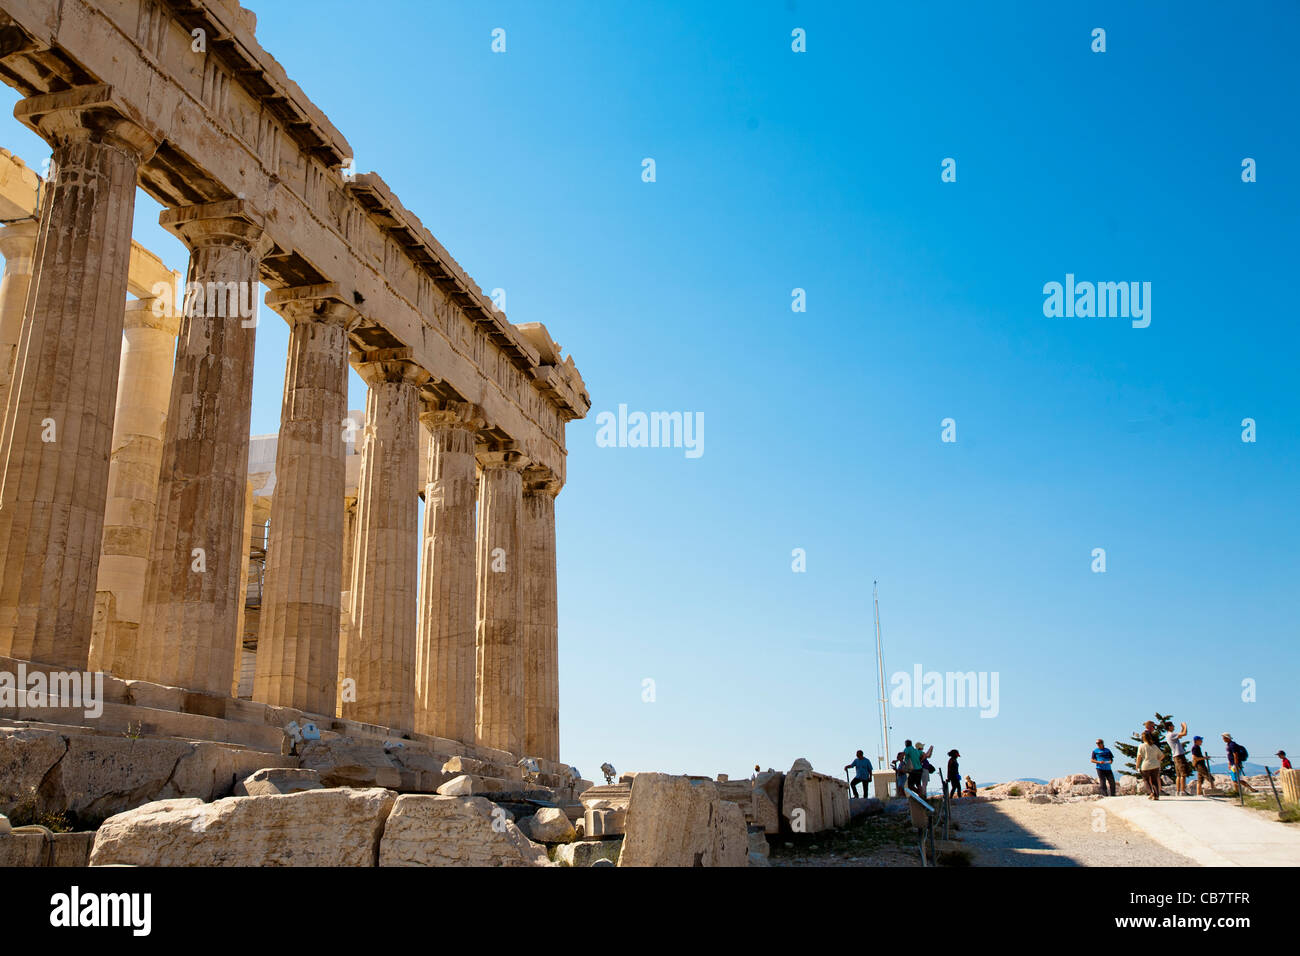 Travel and architecture shots from Greece - Parthenon scale comparison with tourists Stock Photo